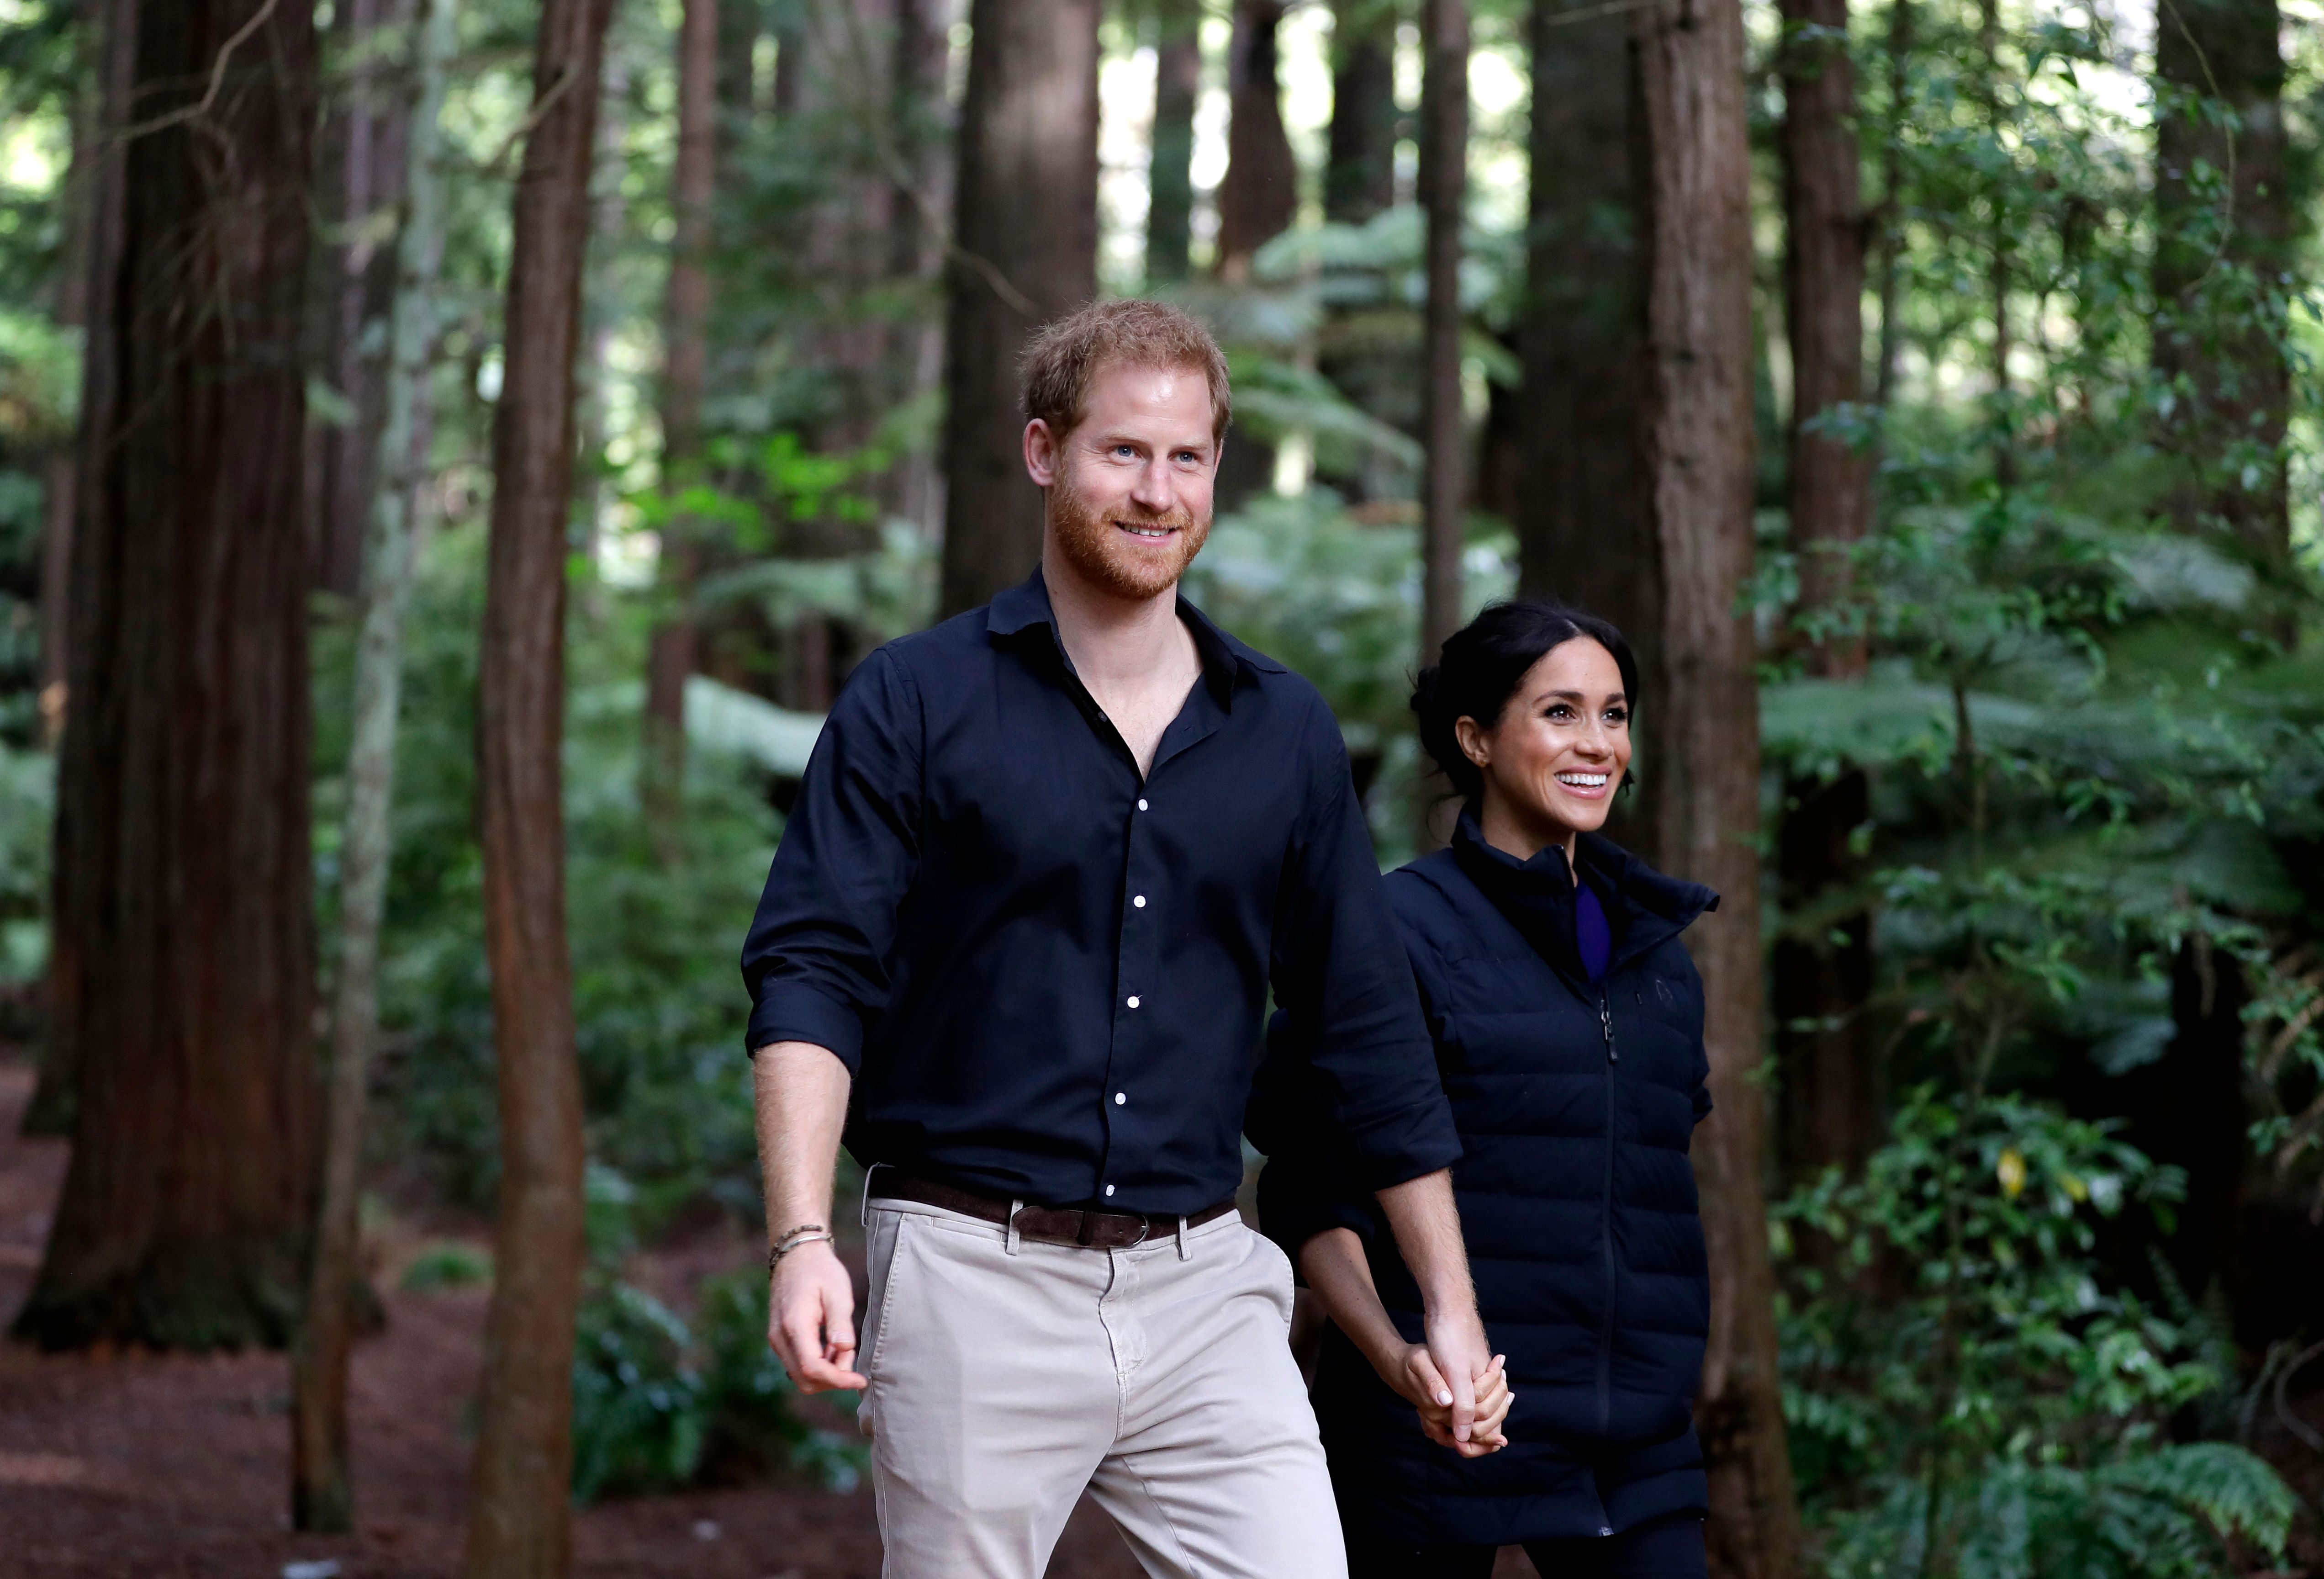 The Duke and Duchess of Sussex at the Redwoods Tree Walk in October 31, 2018 | Photo: Getty Images